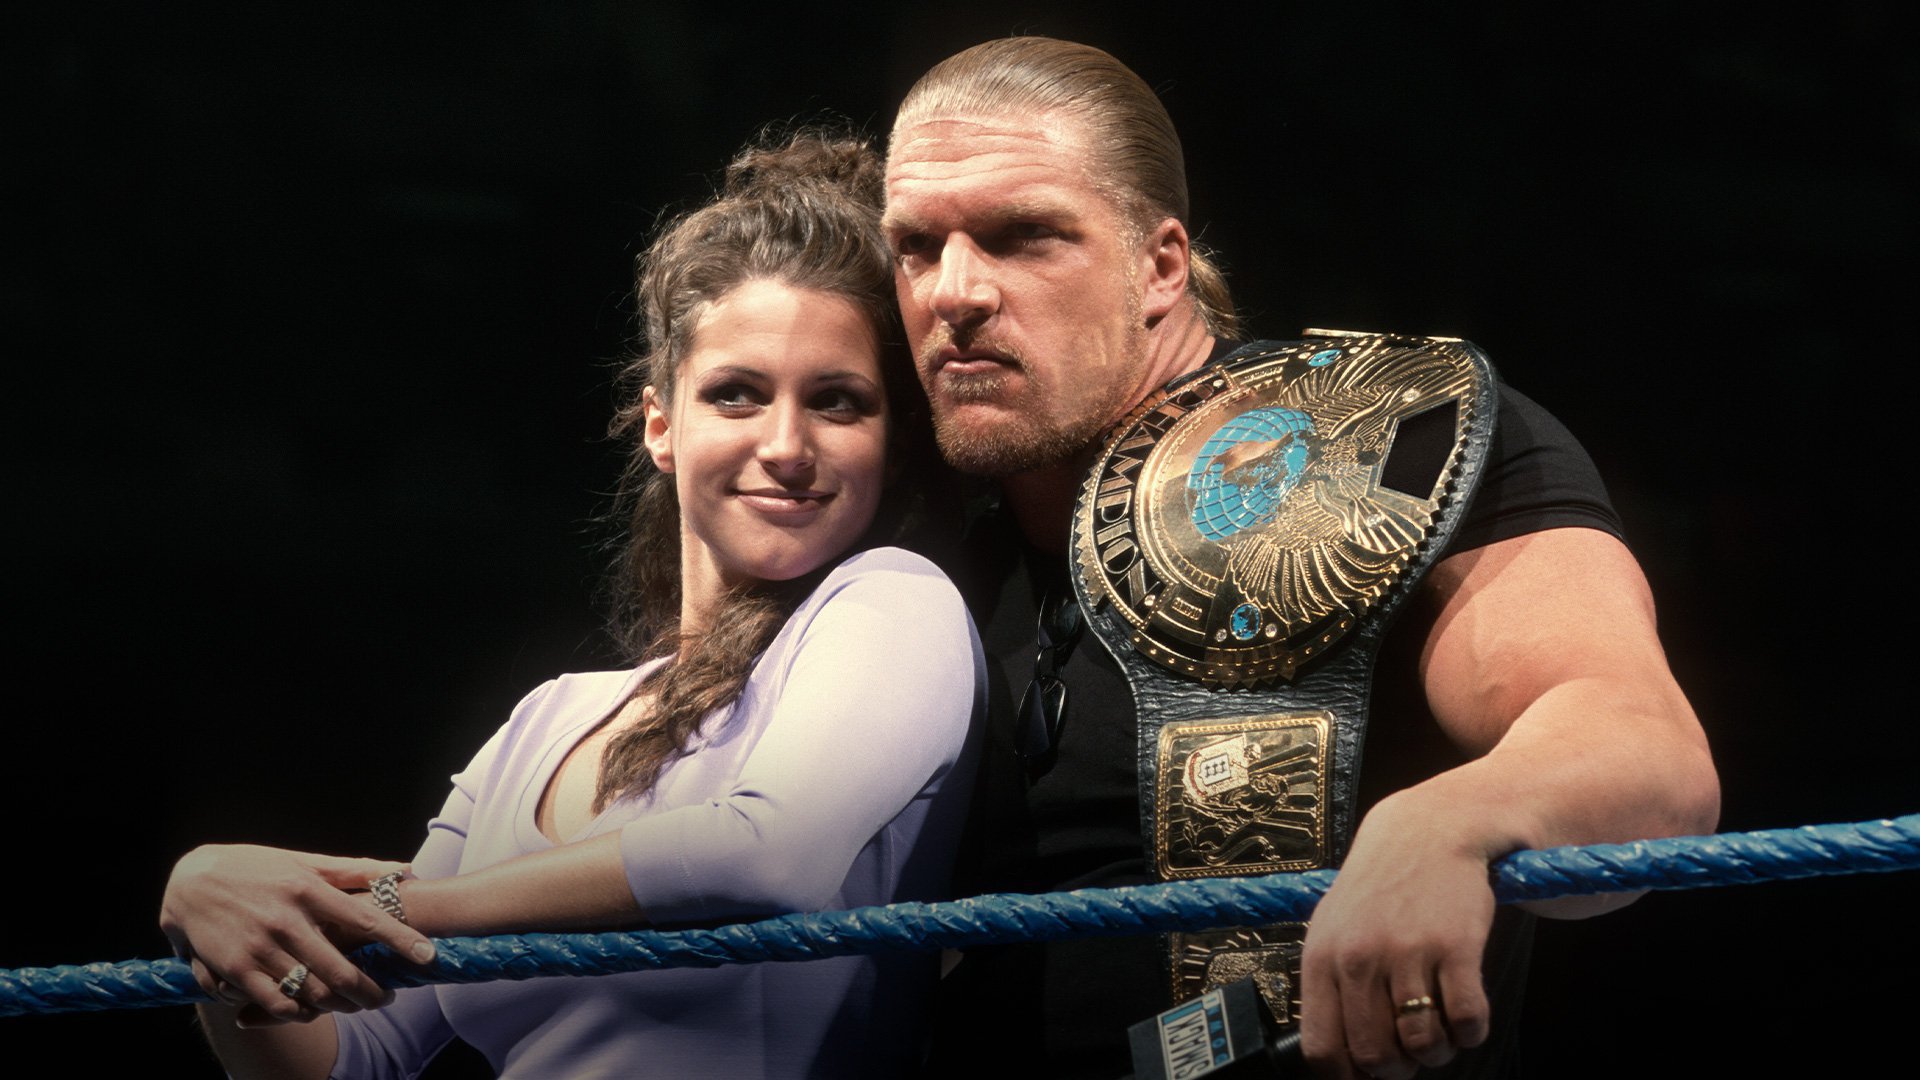 Great Triple H & Stephanie McMahon moments. 